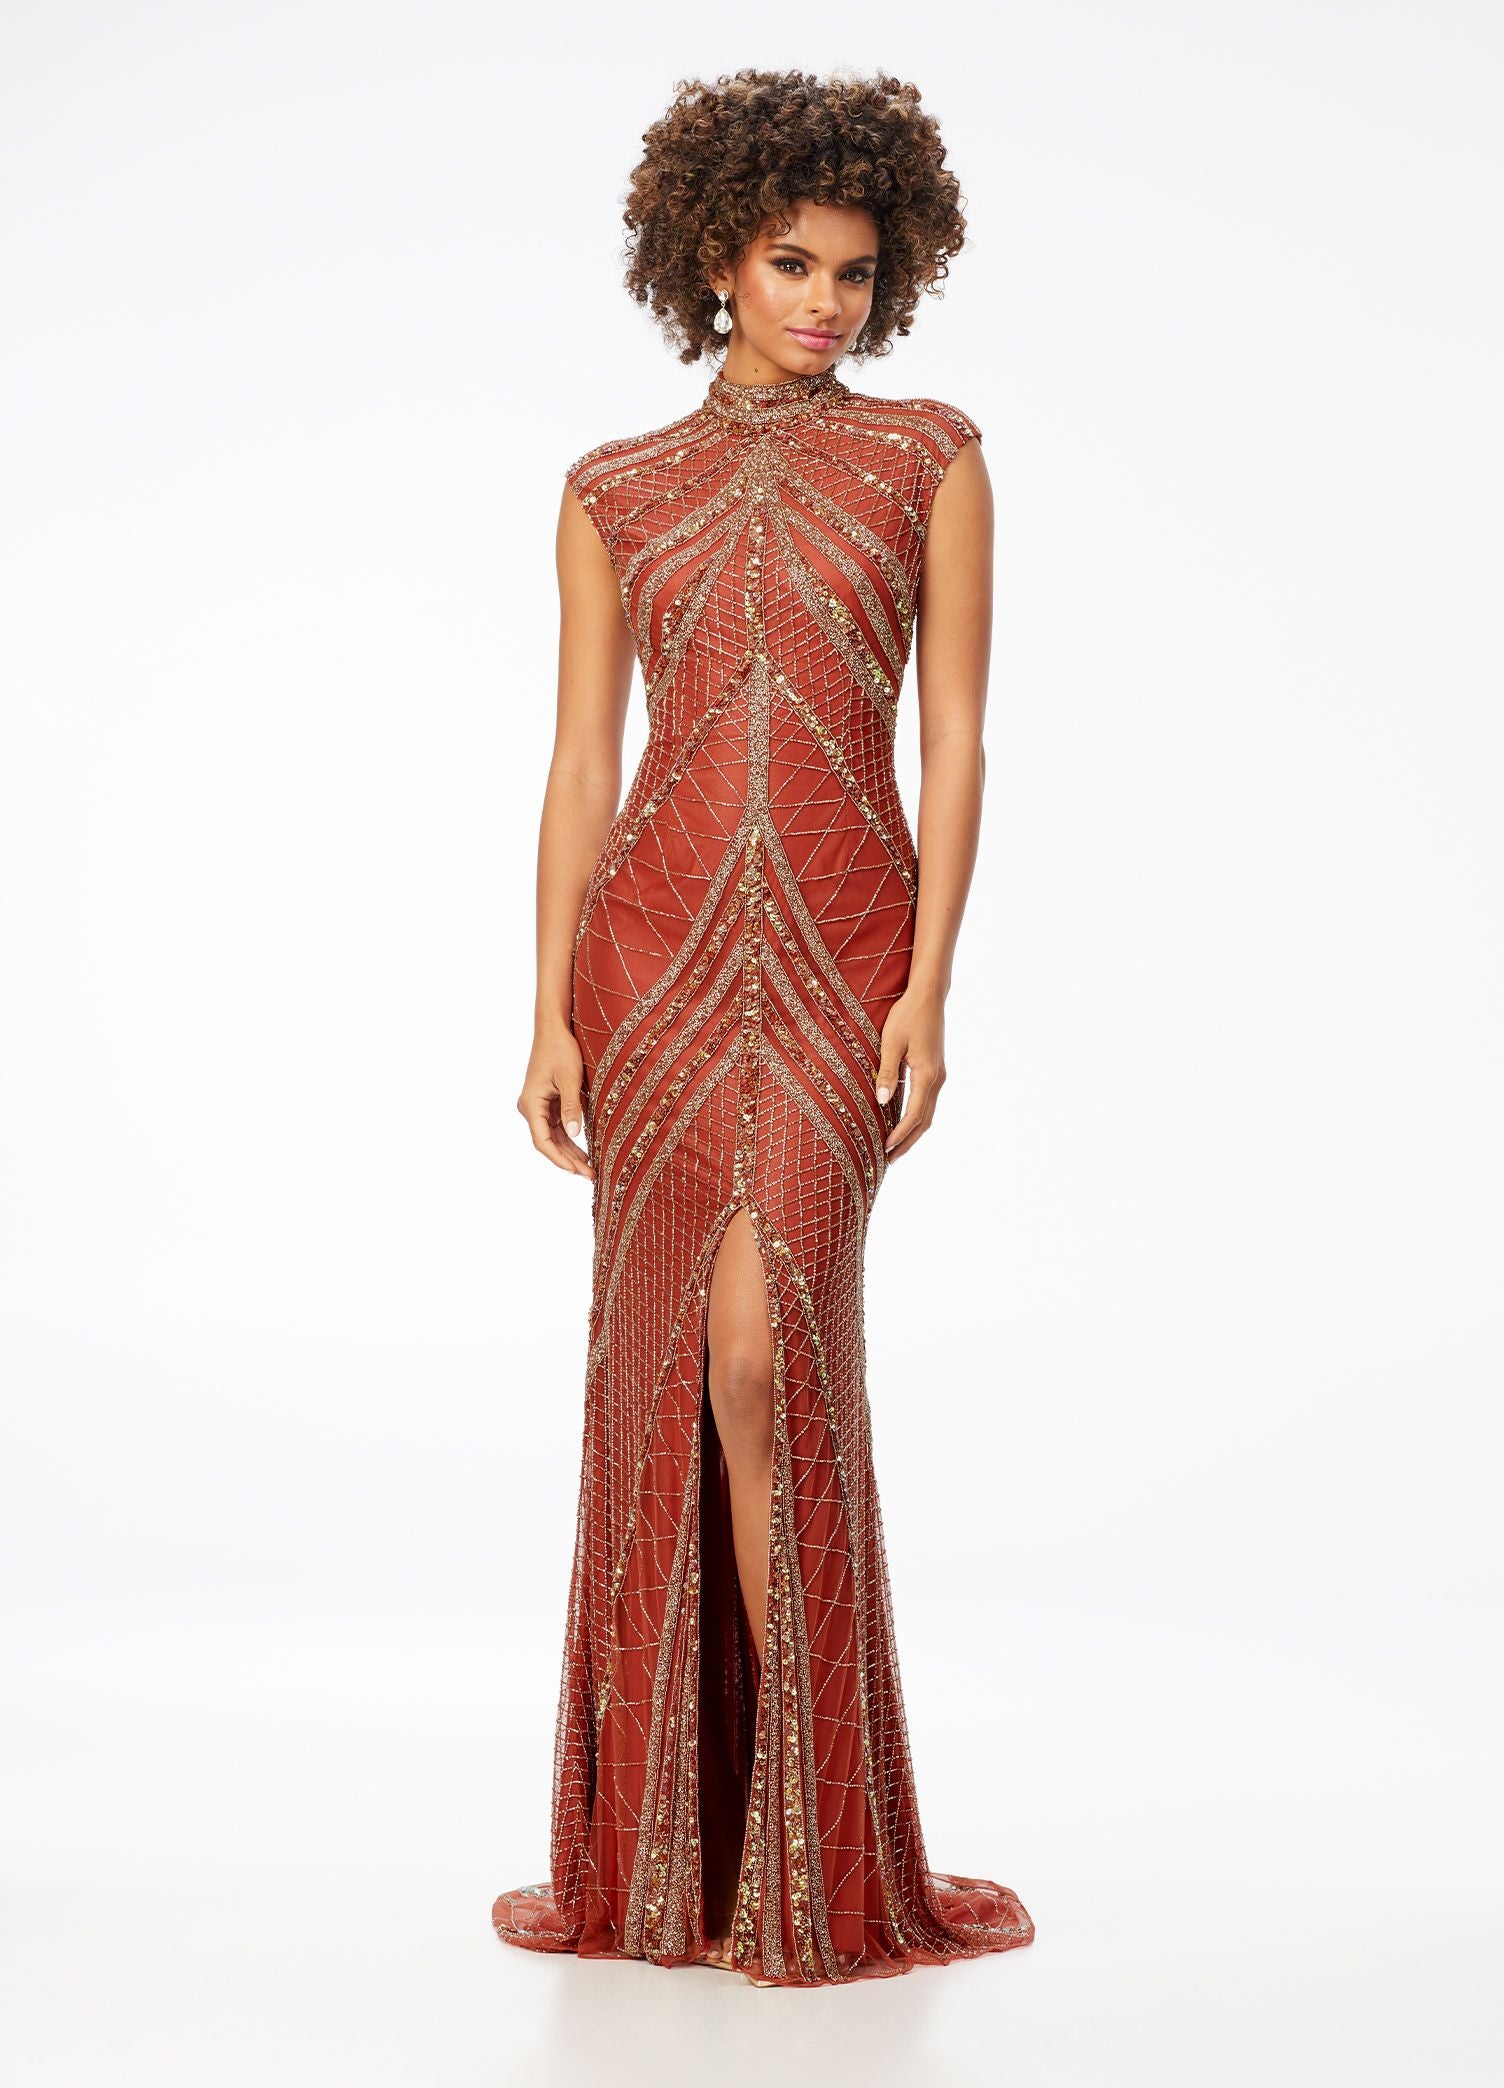    Ashley-Lauren-1624-Amber-high-neckline-beaded-sequins-fitted-evening-gown-with-front-slit-with-a-figure-flattering-beaded-design-pageant-gown-prom-dress